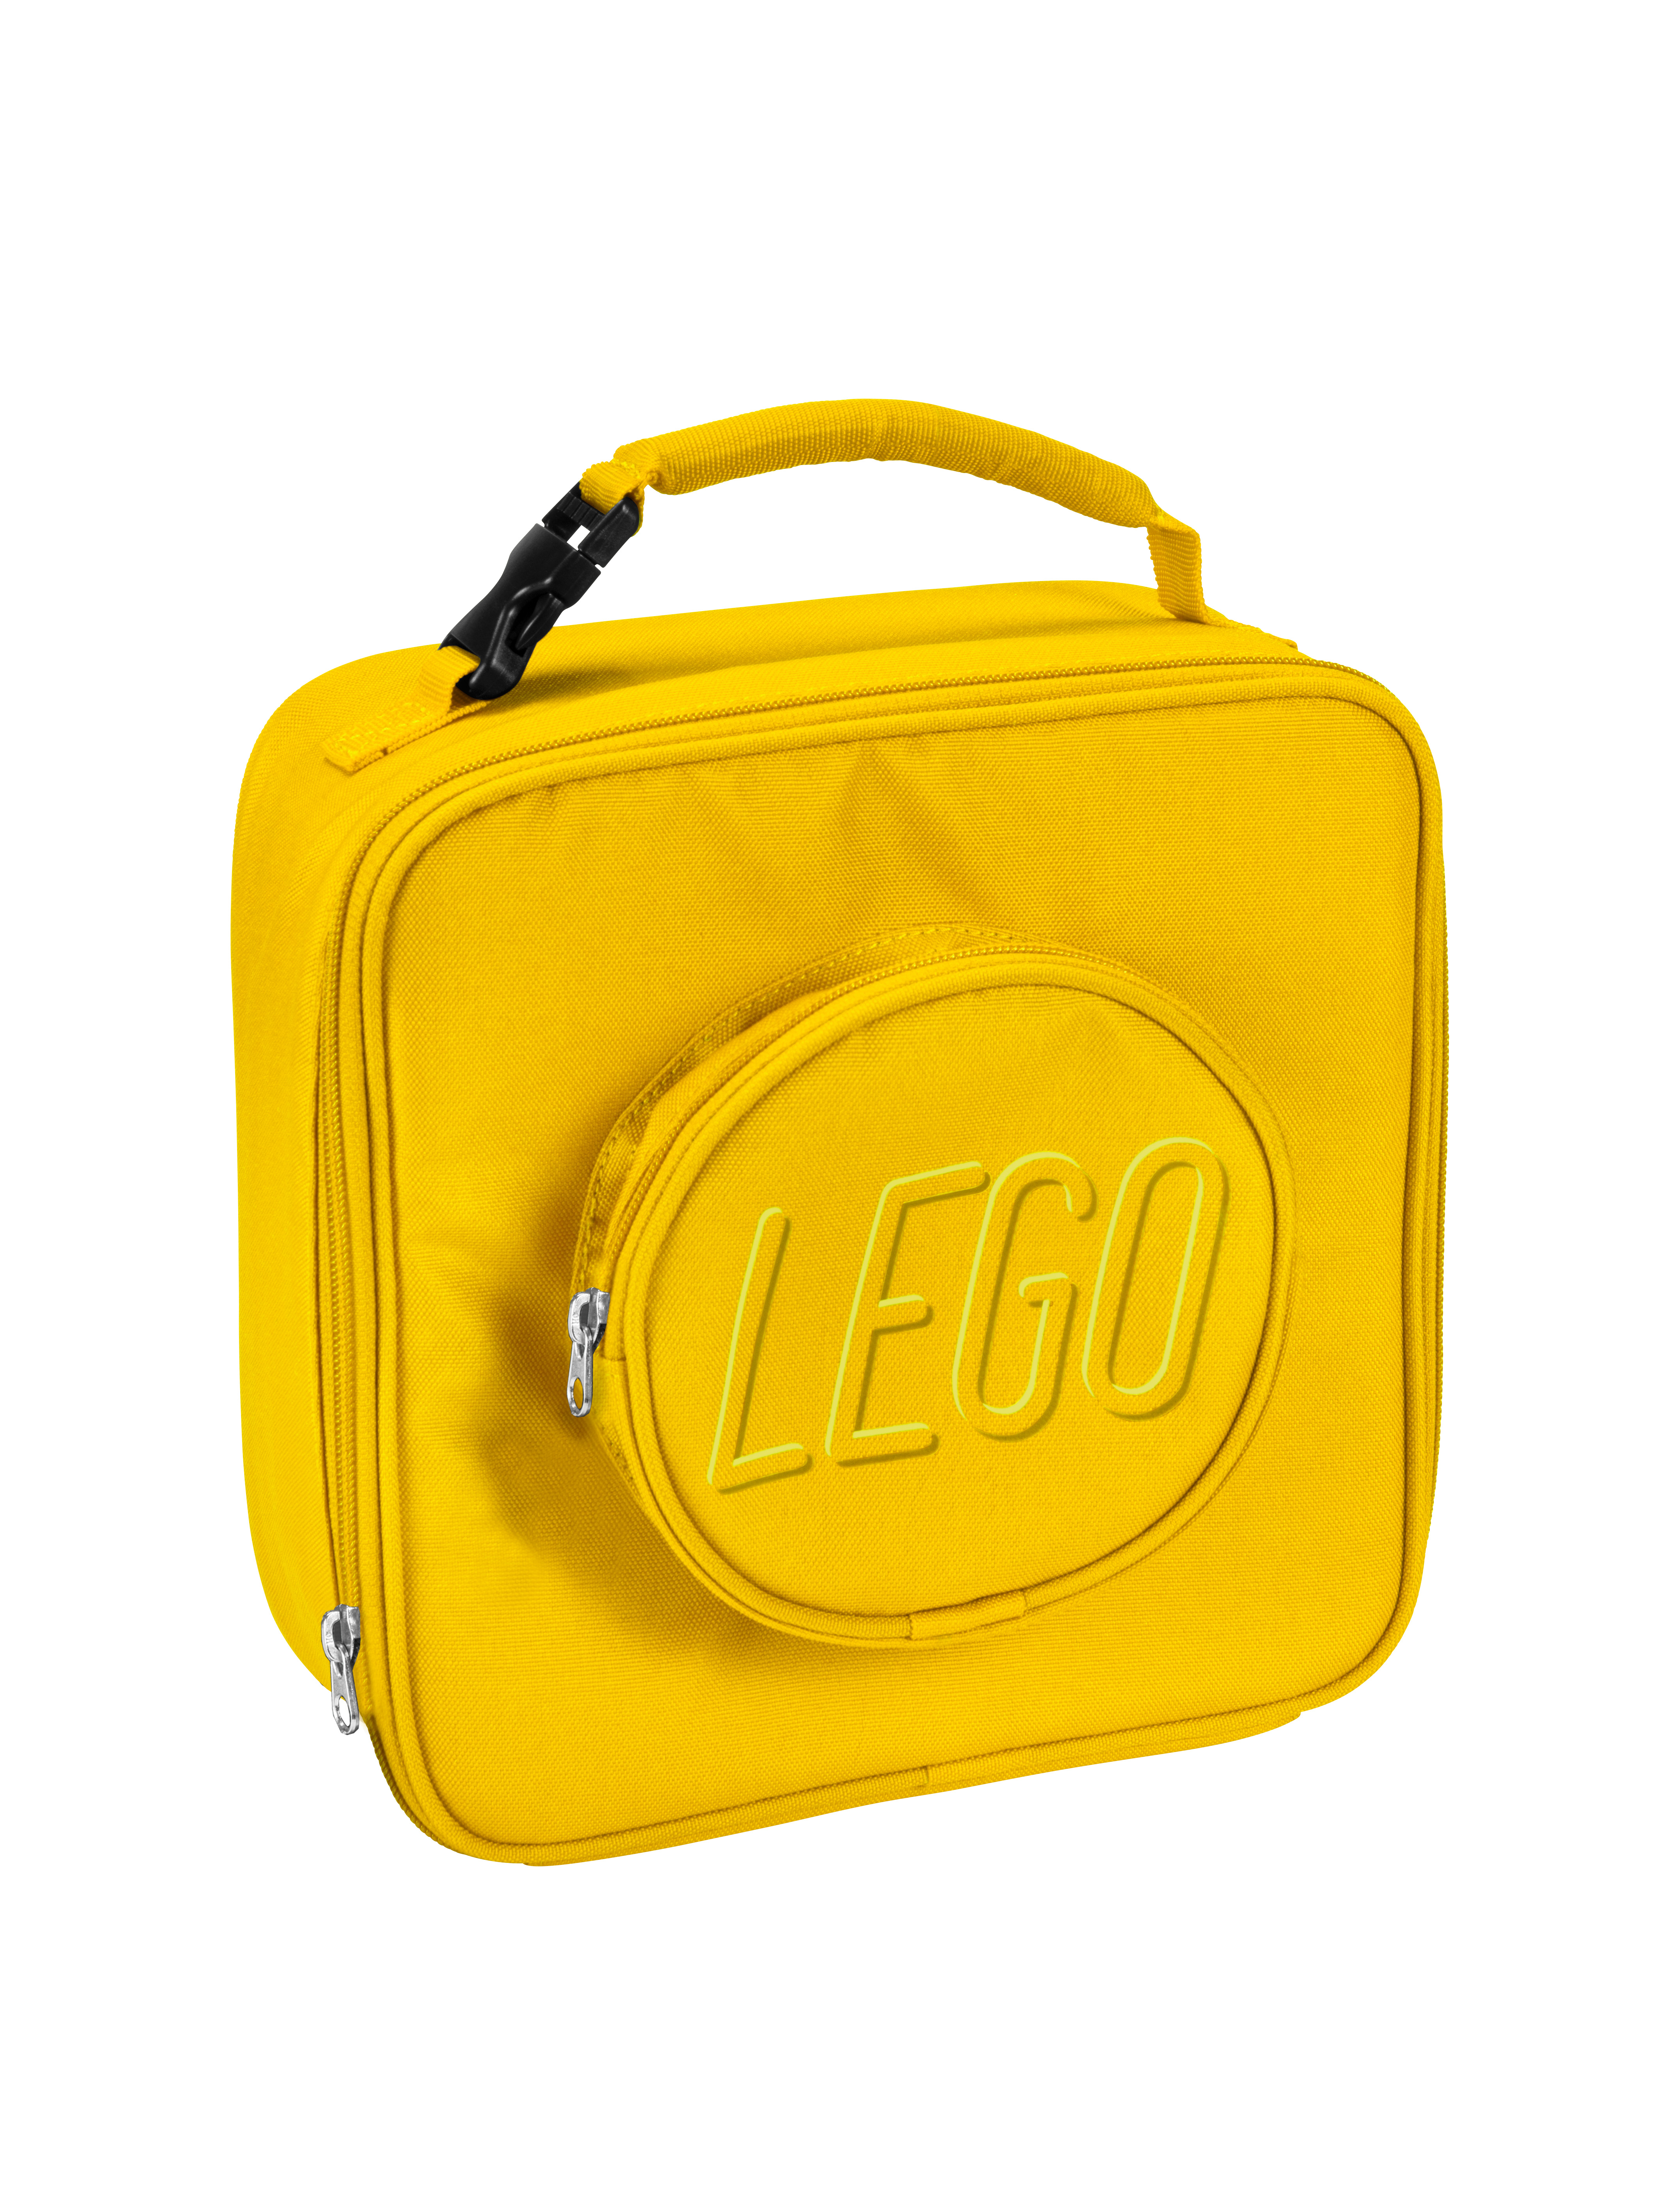 Lego Lunch Box - Pink